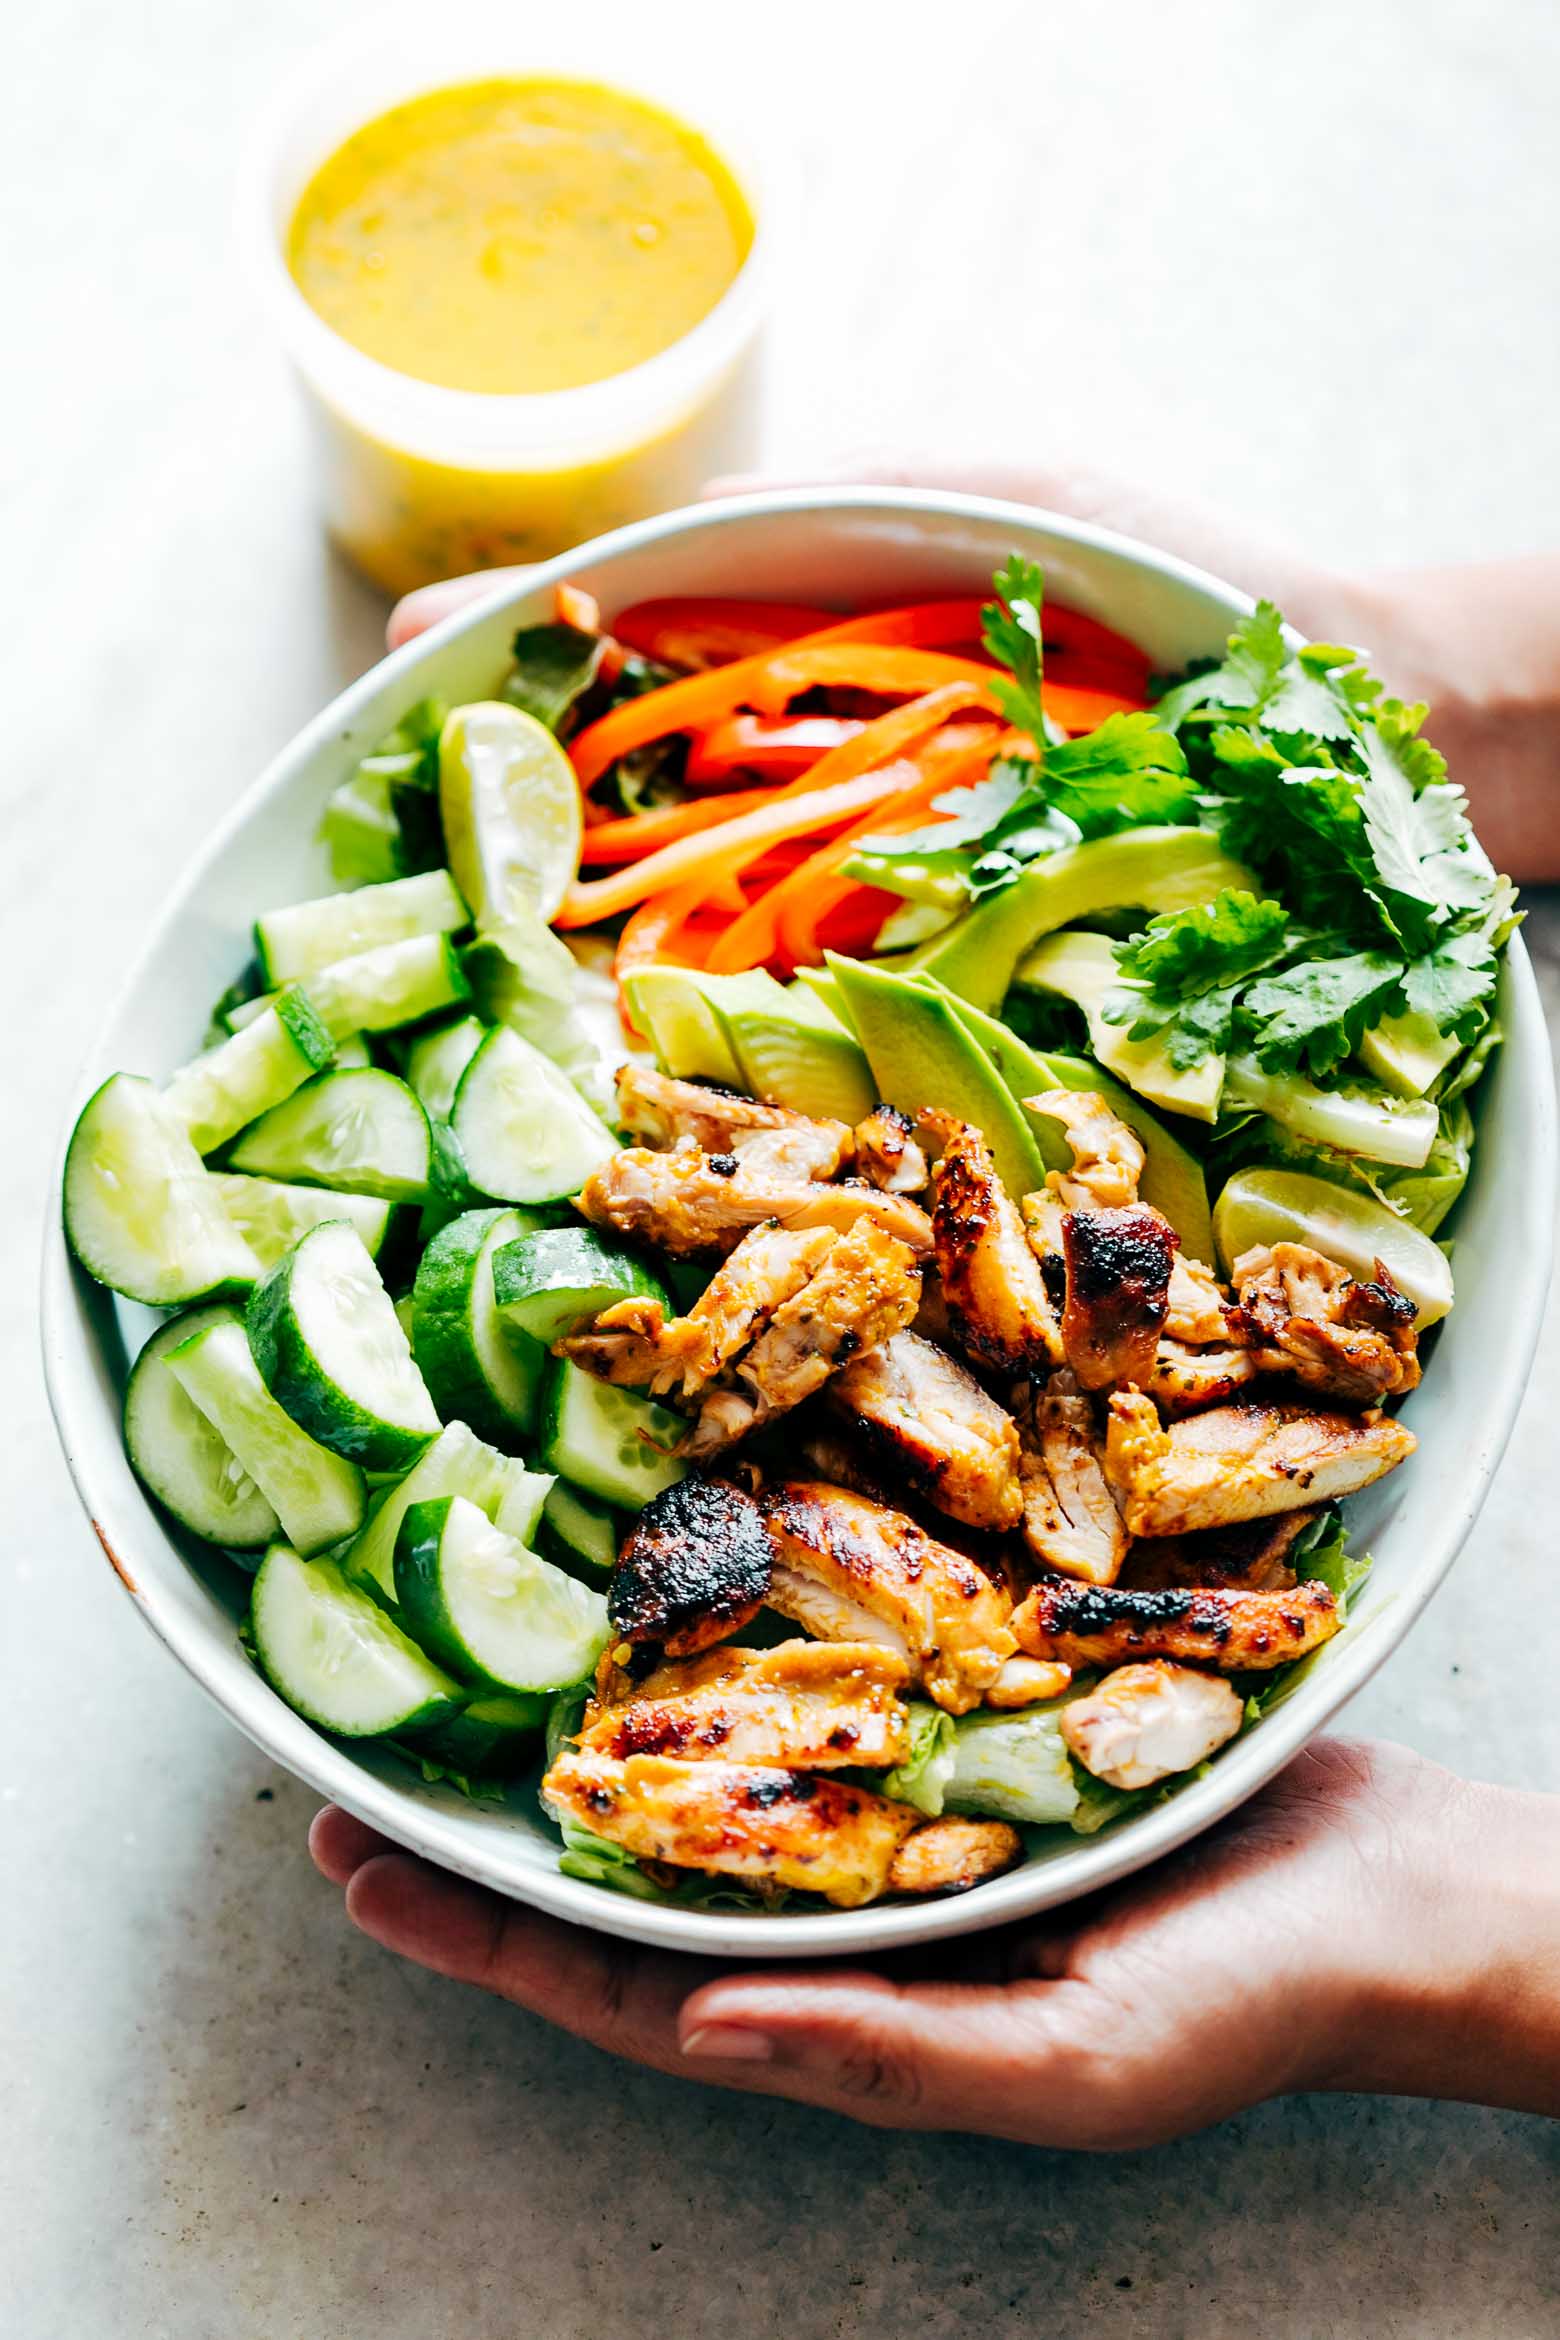 Grilled Chicken Mango Salad with Mango Cilantro Dressing is loaded with cucumbers, peppers, avocado and has a crazy good dressing that doubles up as a marinade!  Best summer salad ever!